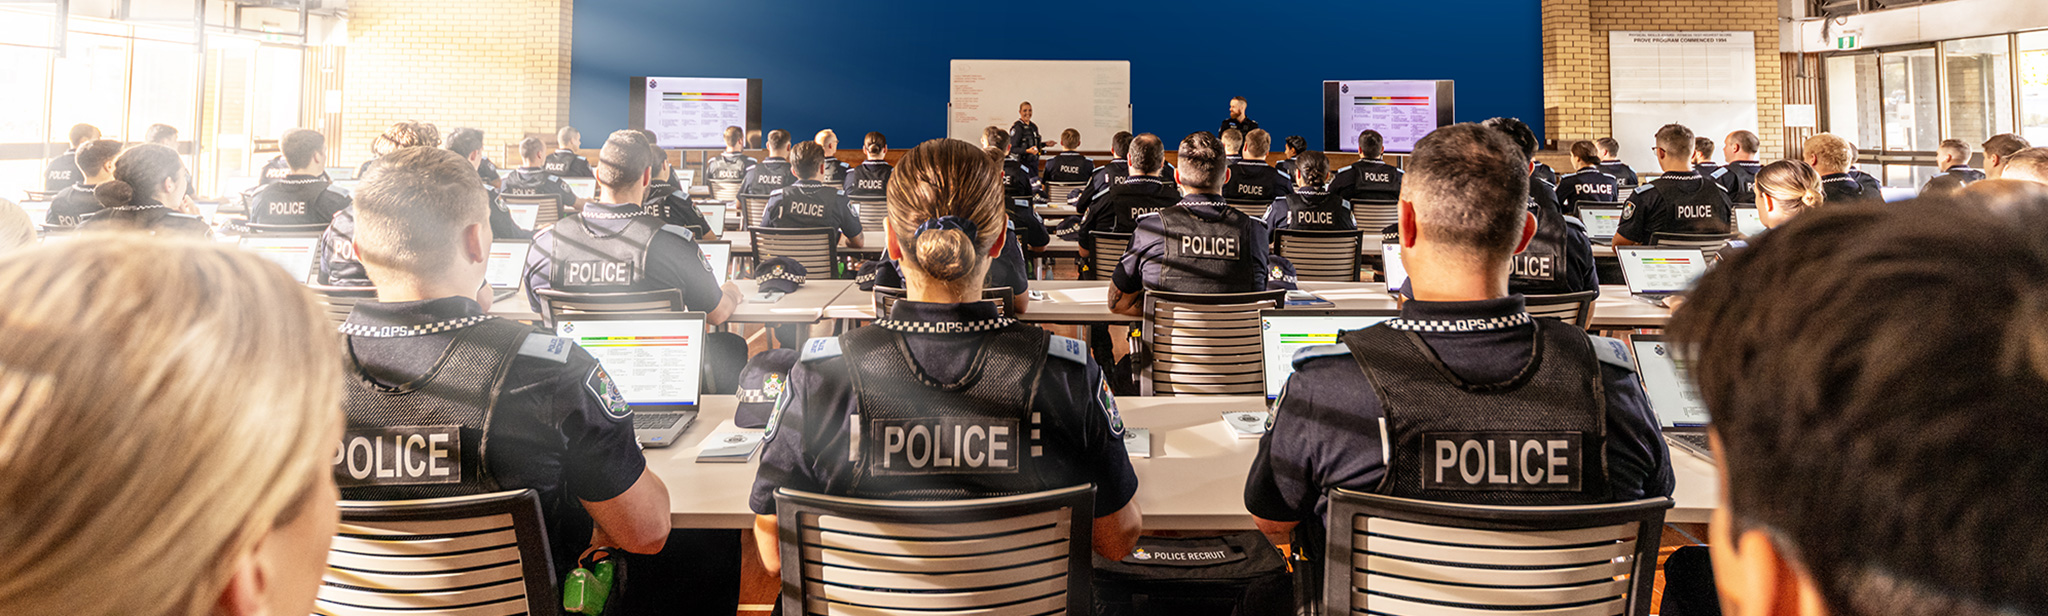 Police recruits in classroom